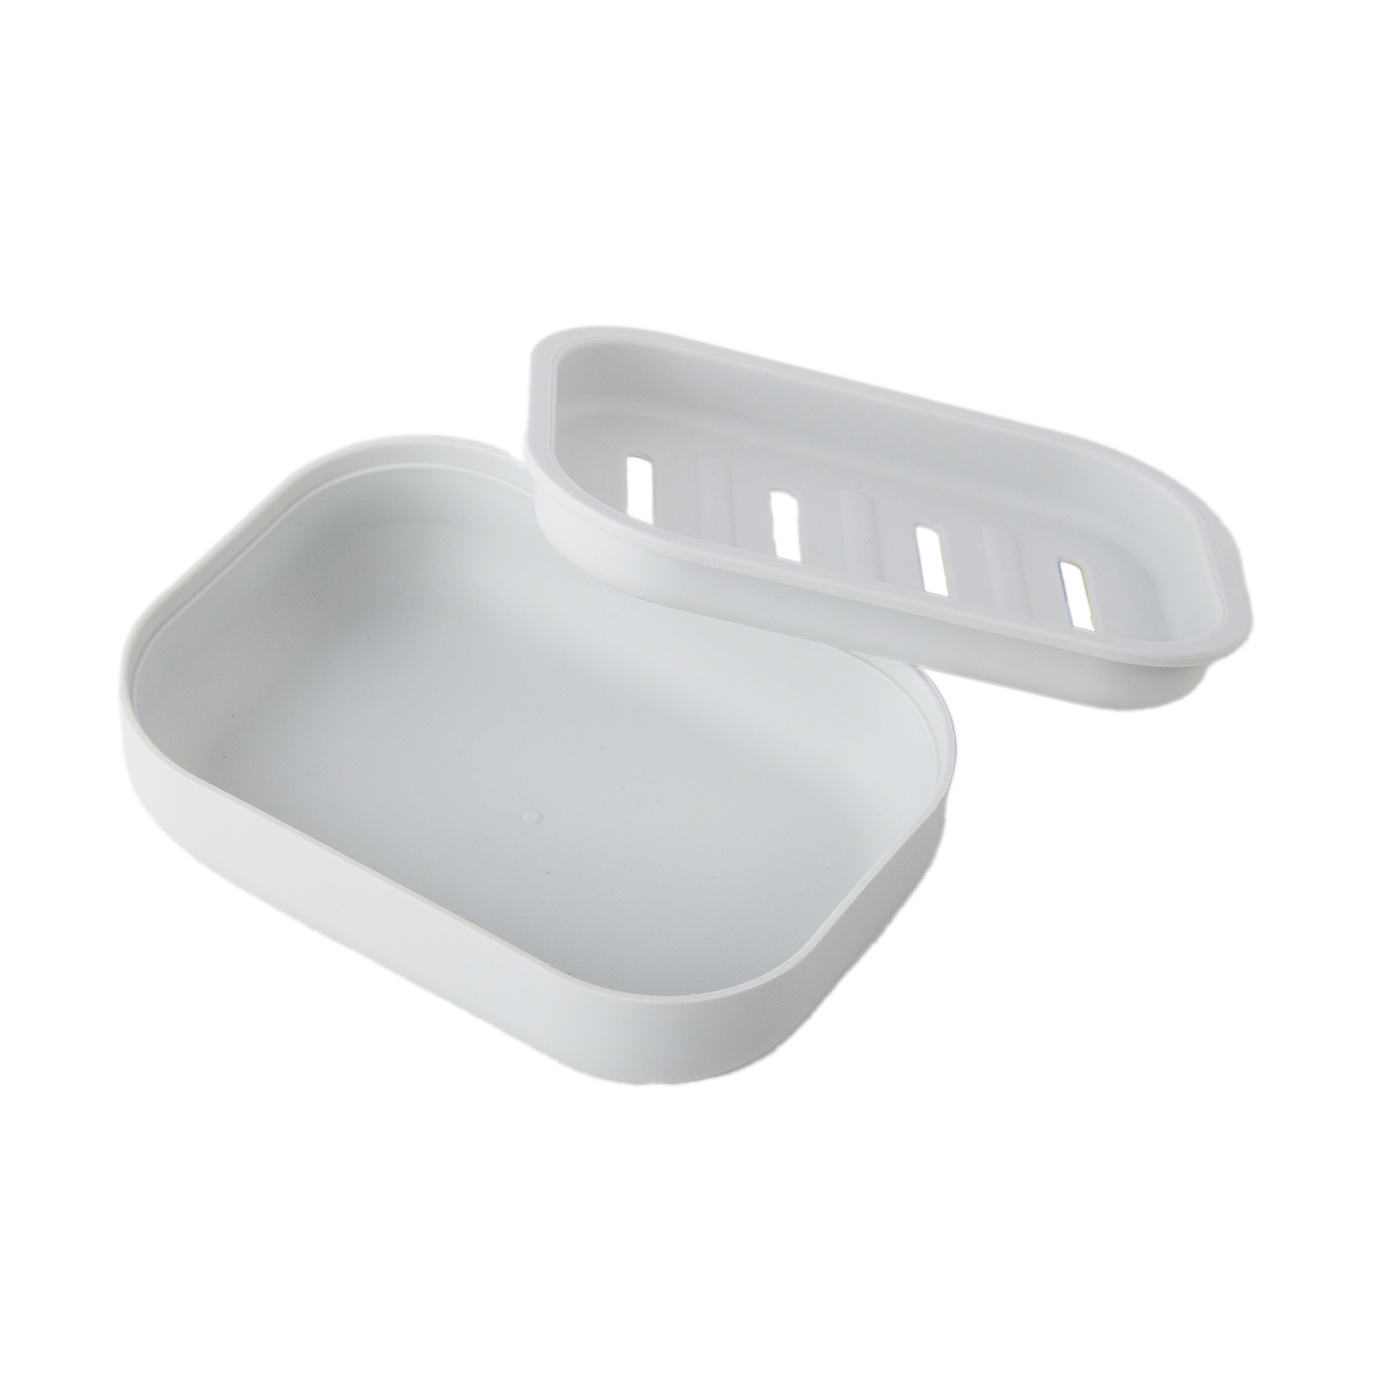 Double Layer Soap Holder With Water Drain3